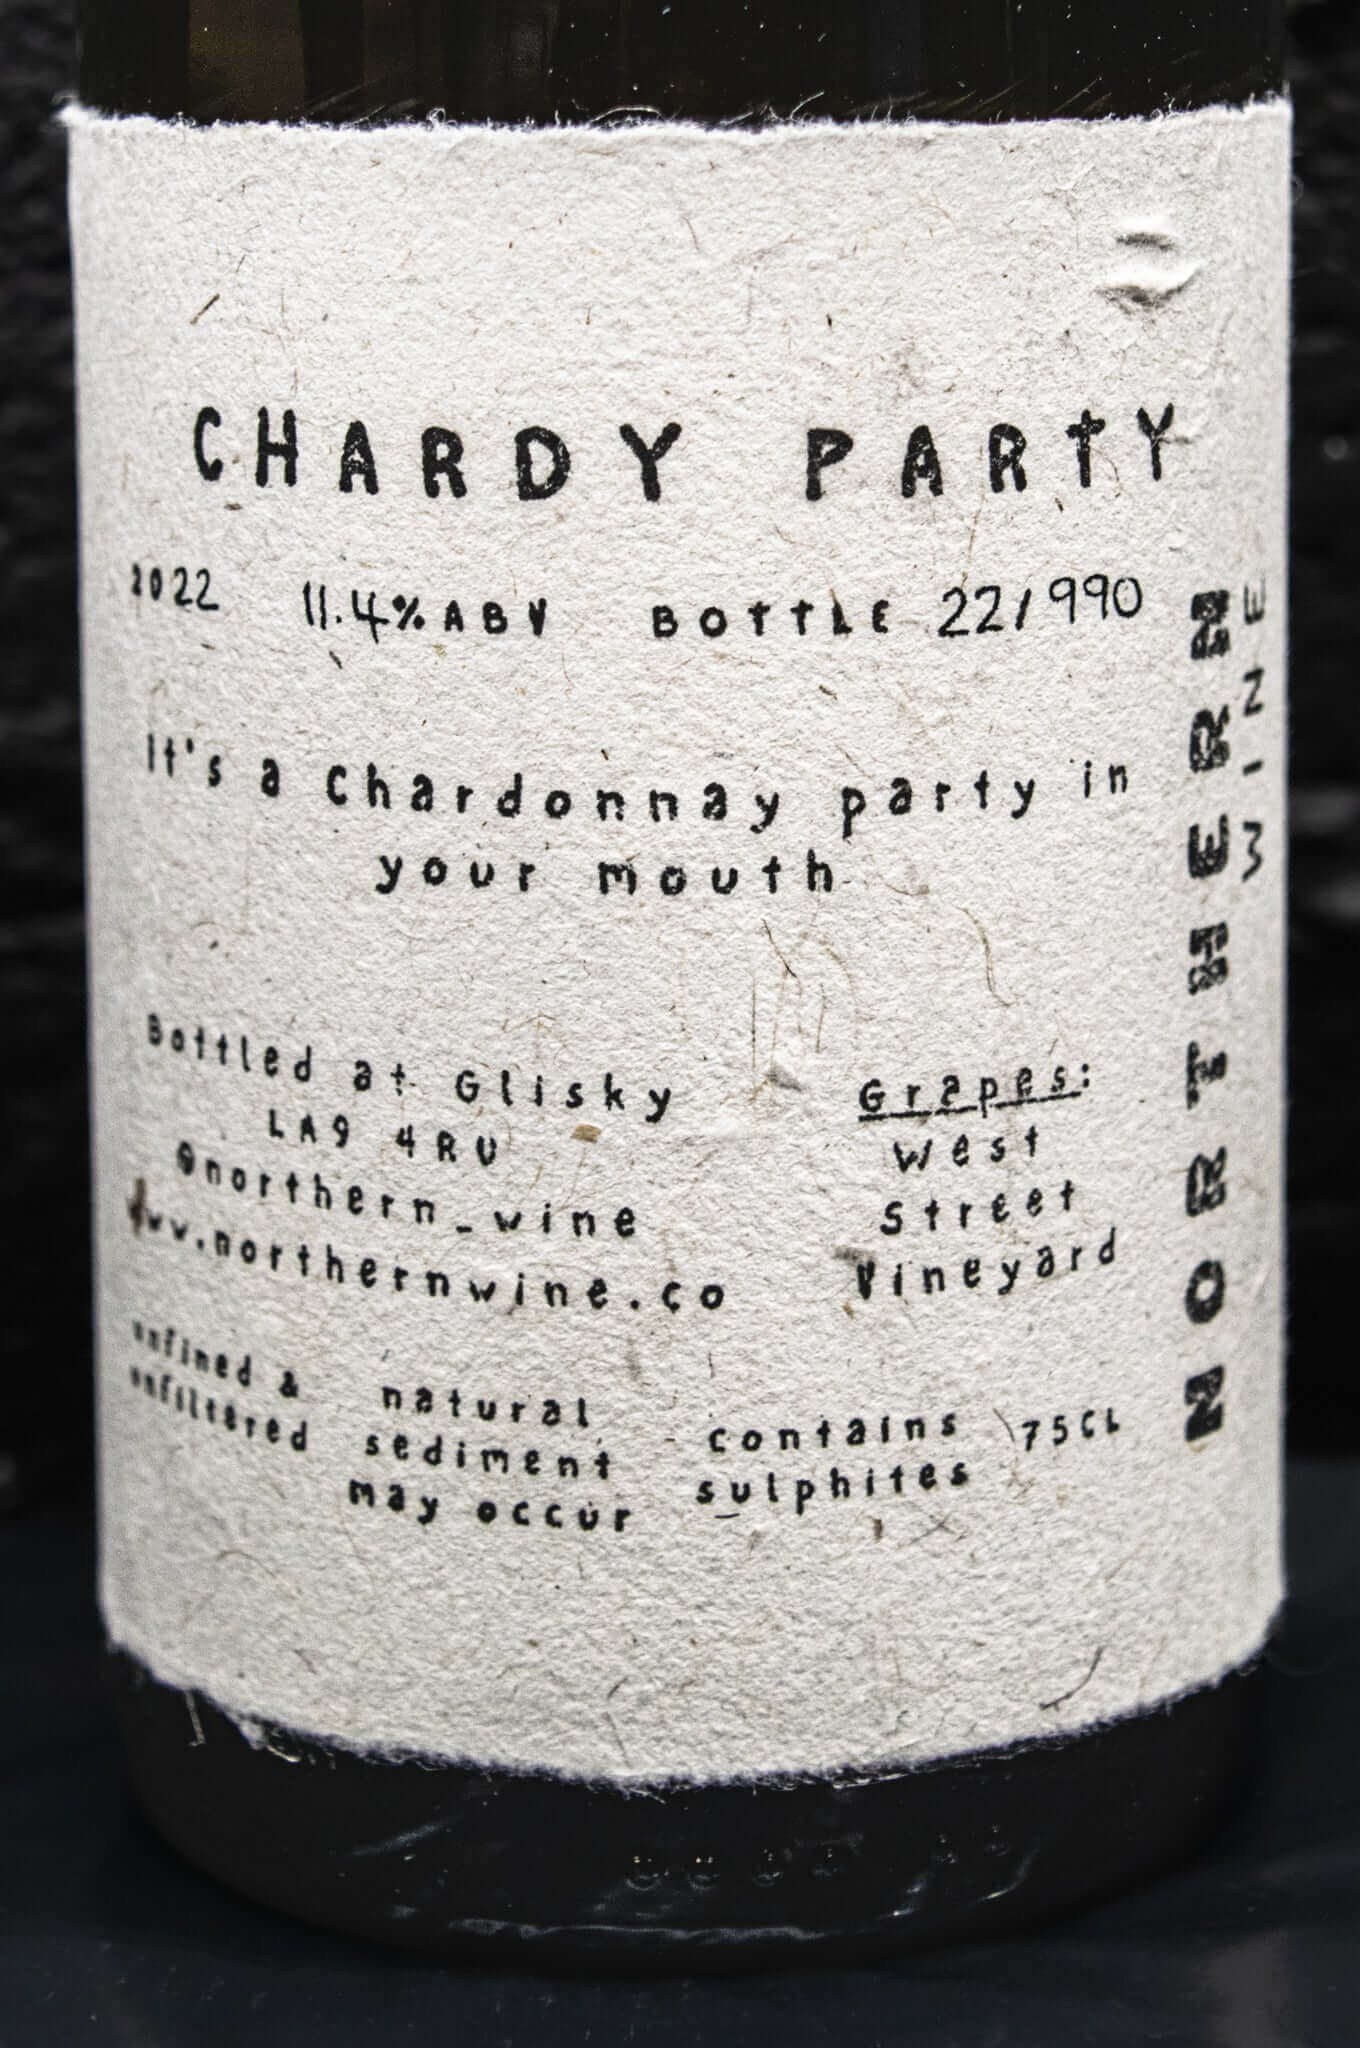 Chardy Party detailed back label